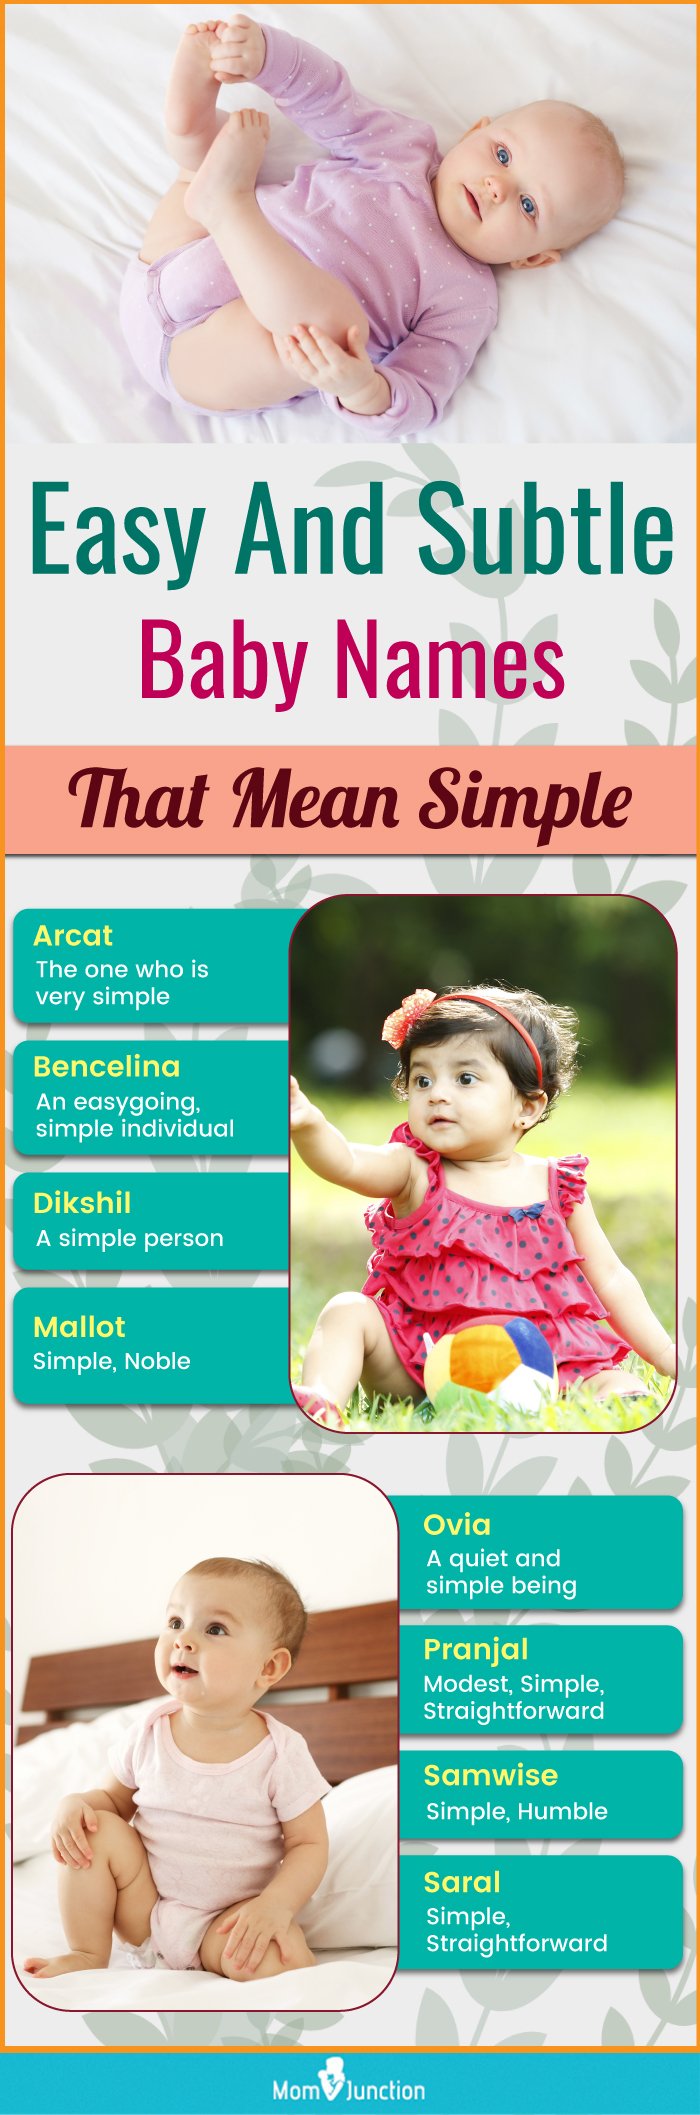 easy and subtle baby names that mean simple (infographic)